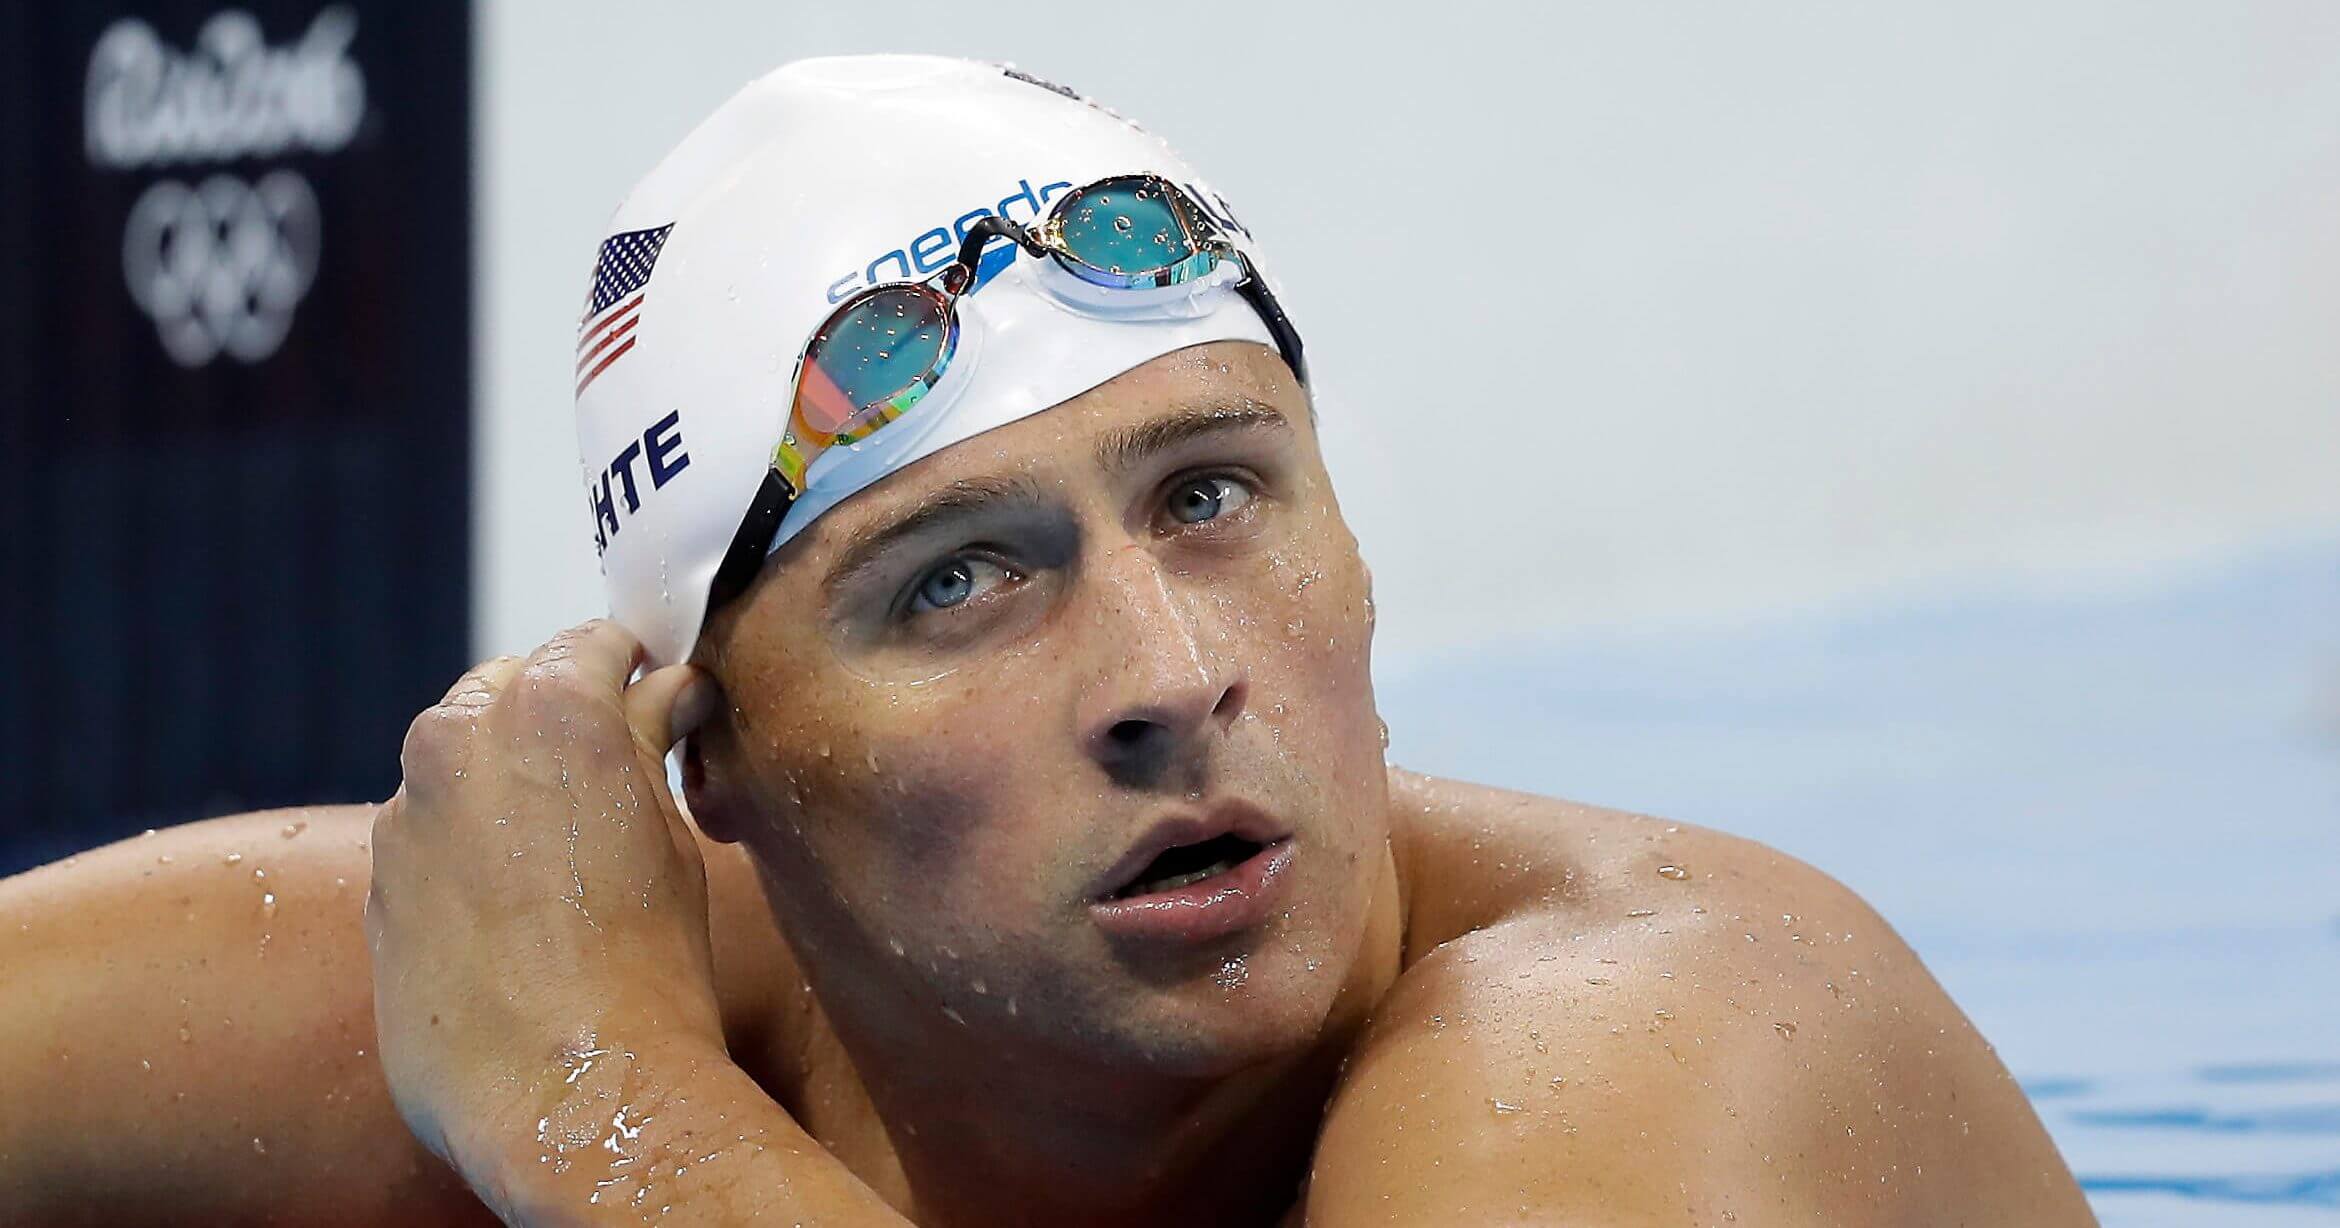 Ryan Lochte checks his time in a men's 4x200-meter freestyle heat at the Summer Olympics in Rio de Janeiro on Aug. 9, 2016.